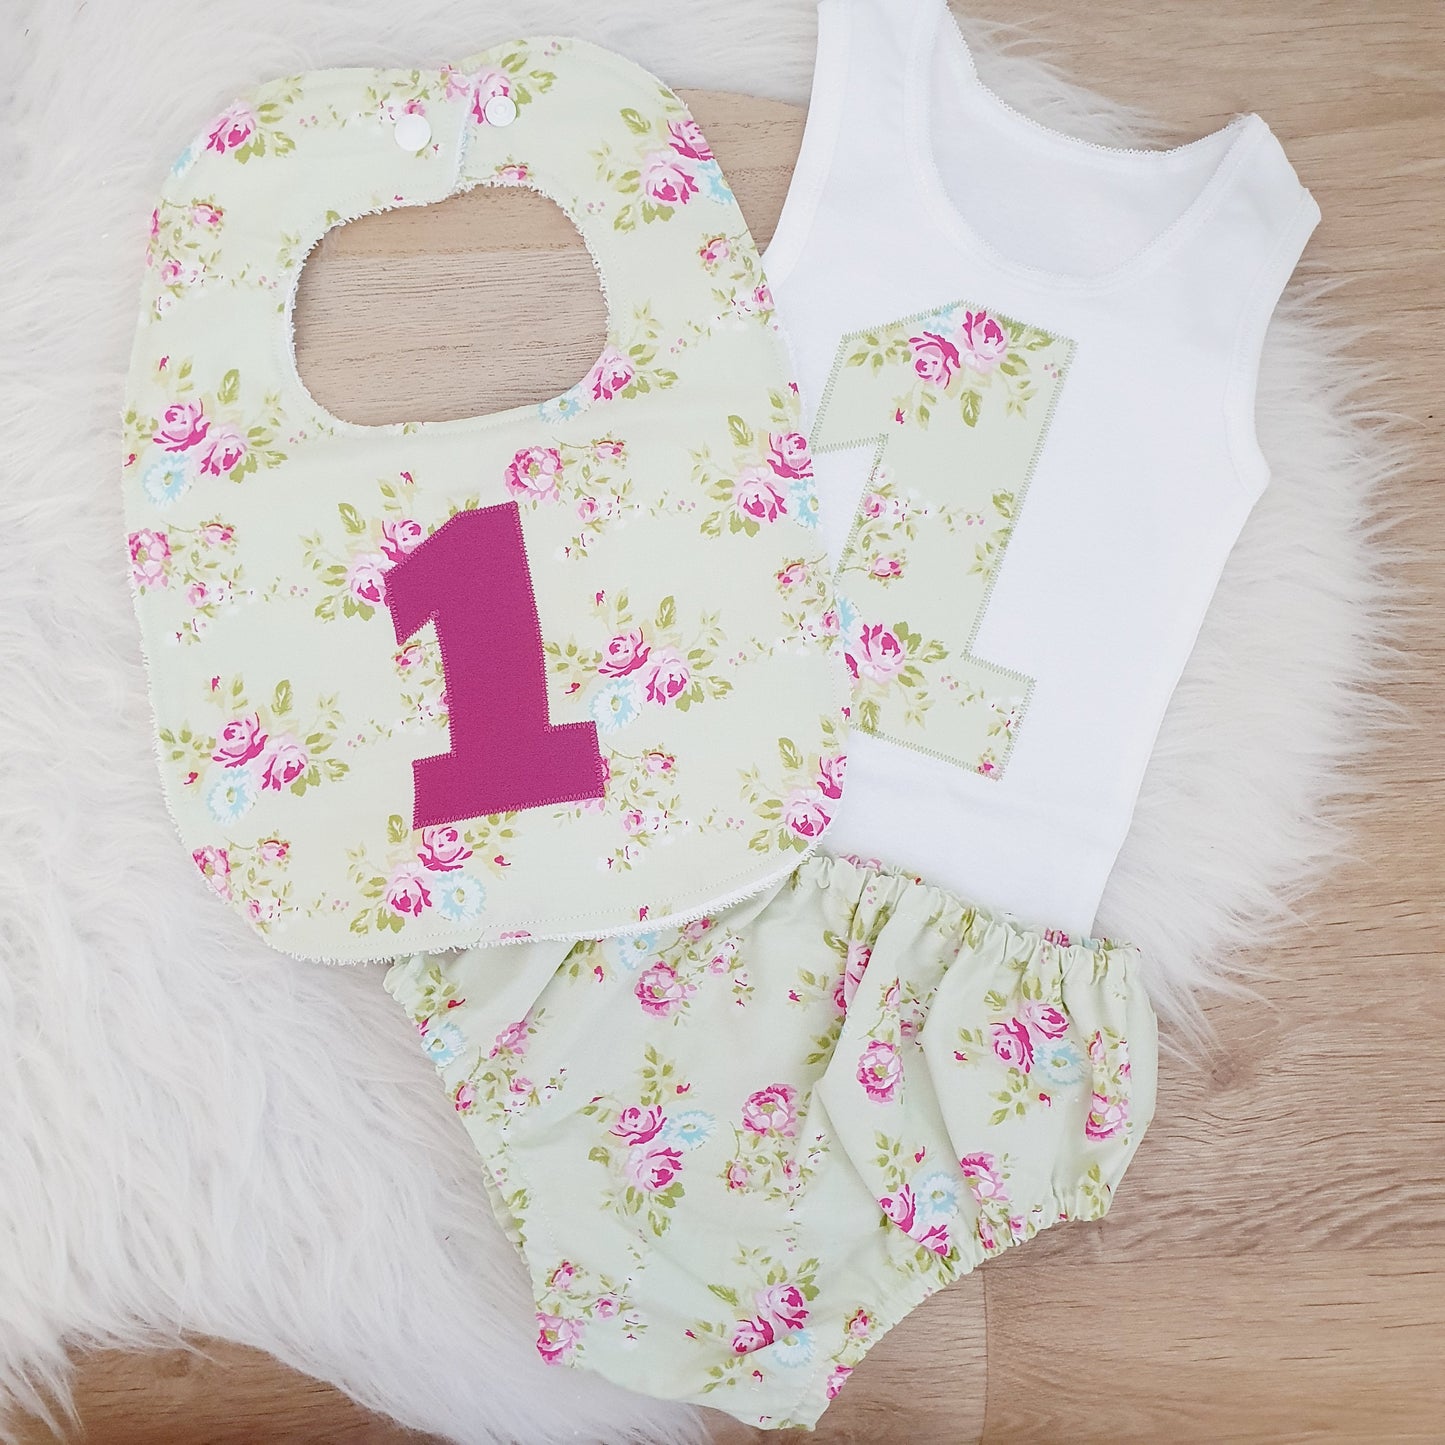 First Birthday Outfit, Cake Smash Outfit, Nappy Cover, Singlet & Bib Set, Size 1 - GREEN FLORAL